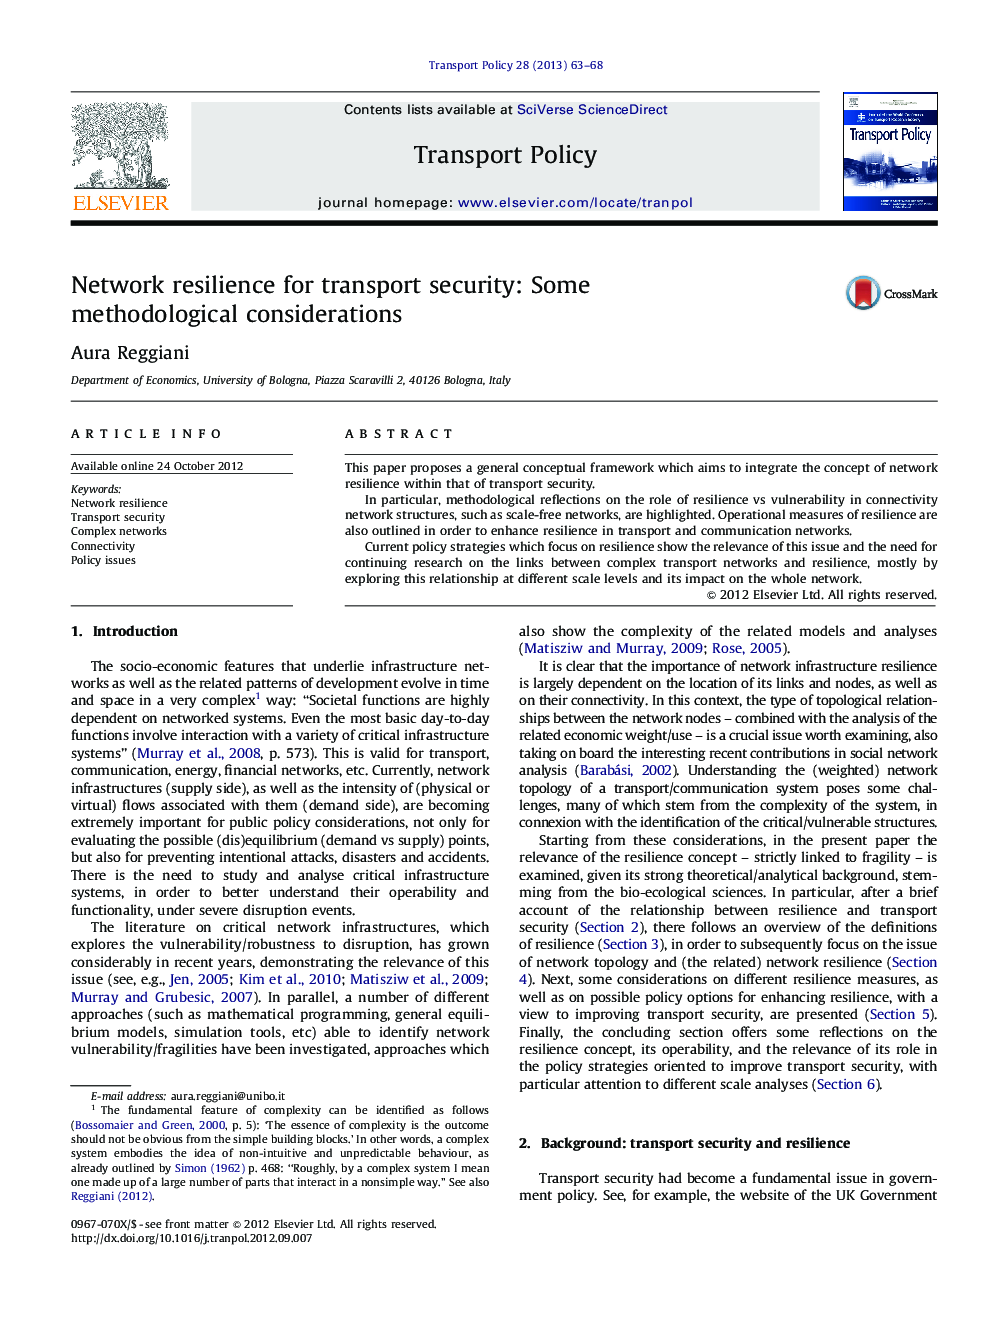 Network resilience for transport security: Some methodological considerations